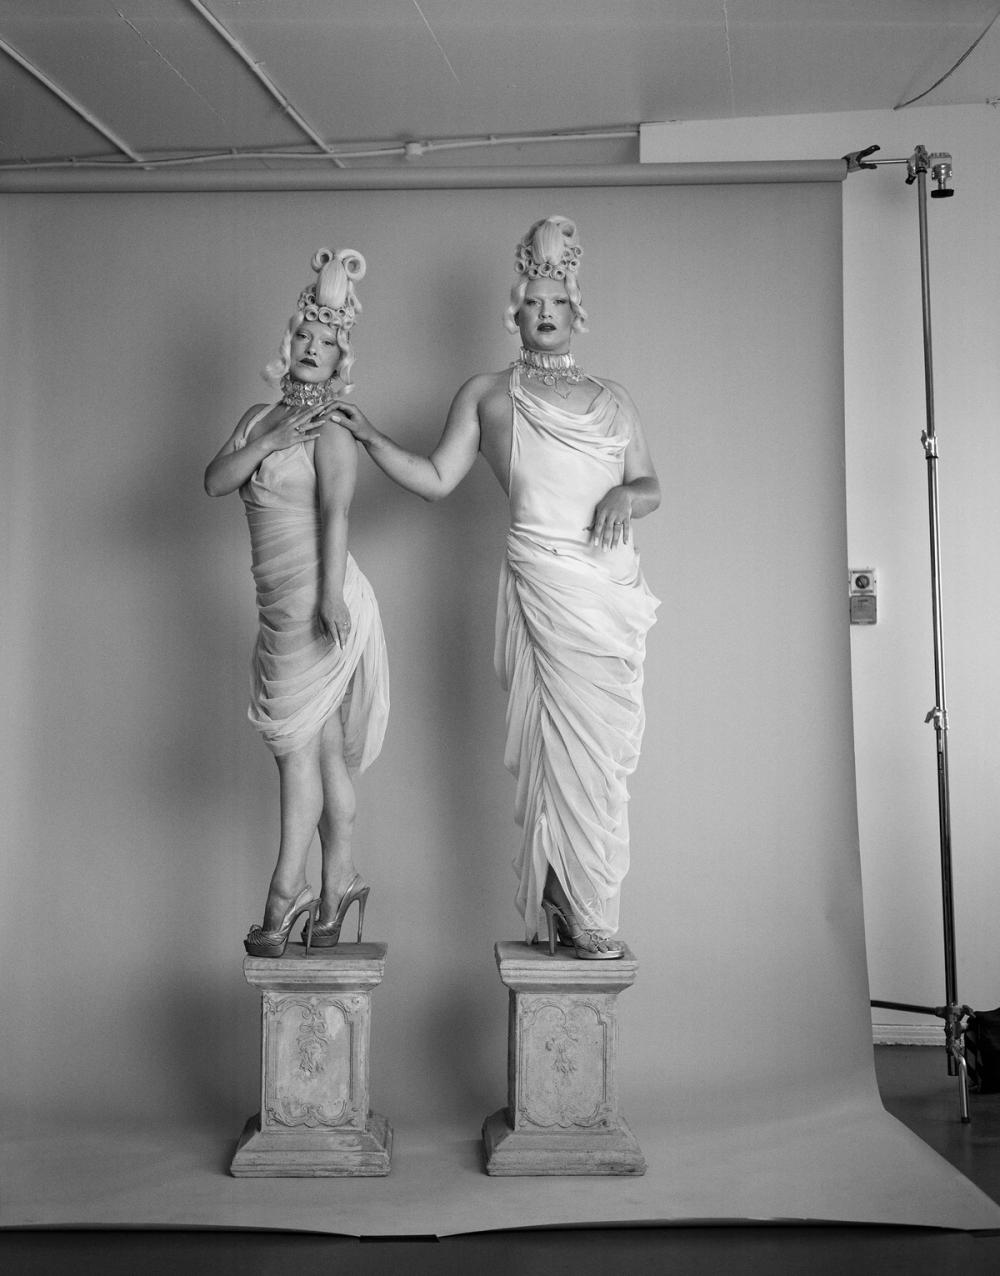 A black and white photograph of two people dressed in white draped dresses standing on pillars in a photography studio.